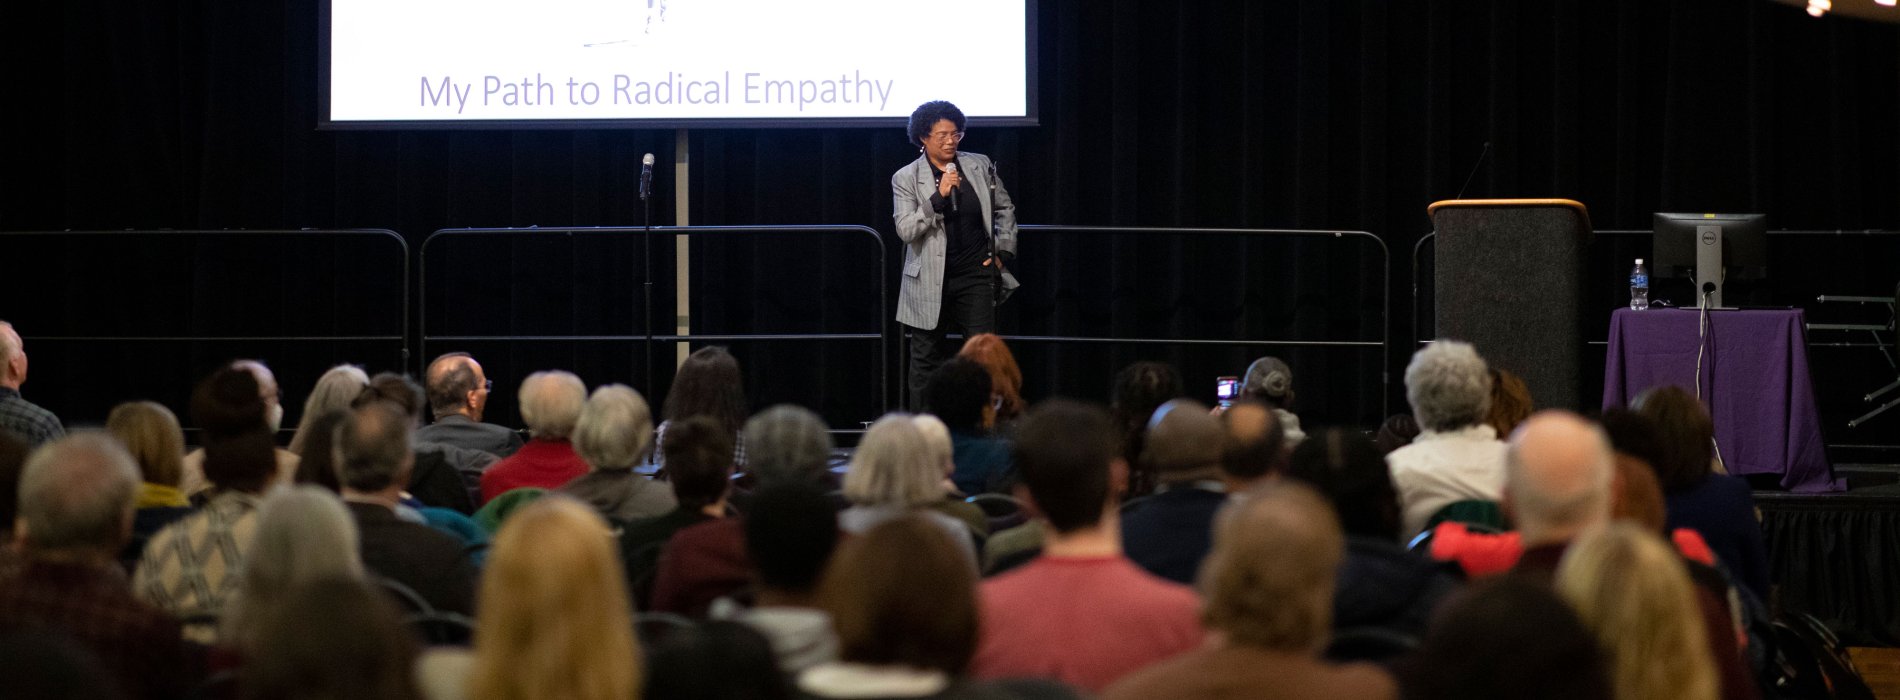 Terri Givens stands on stage before a presentation slide that says "My path to radical empathy," and speaks to her a seated audience using a microphone.